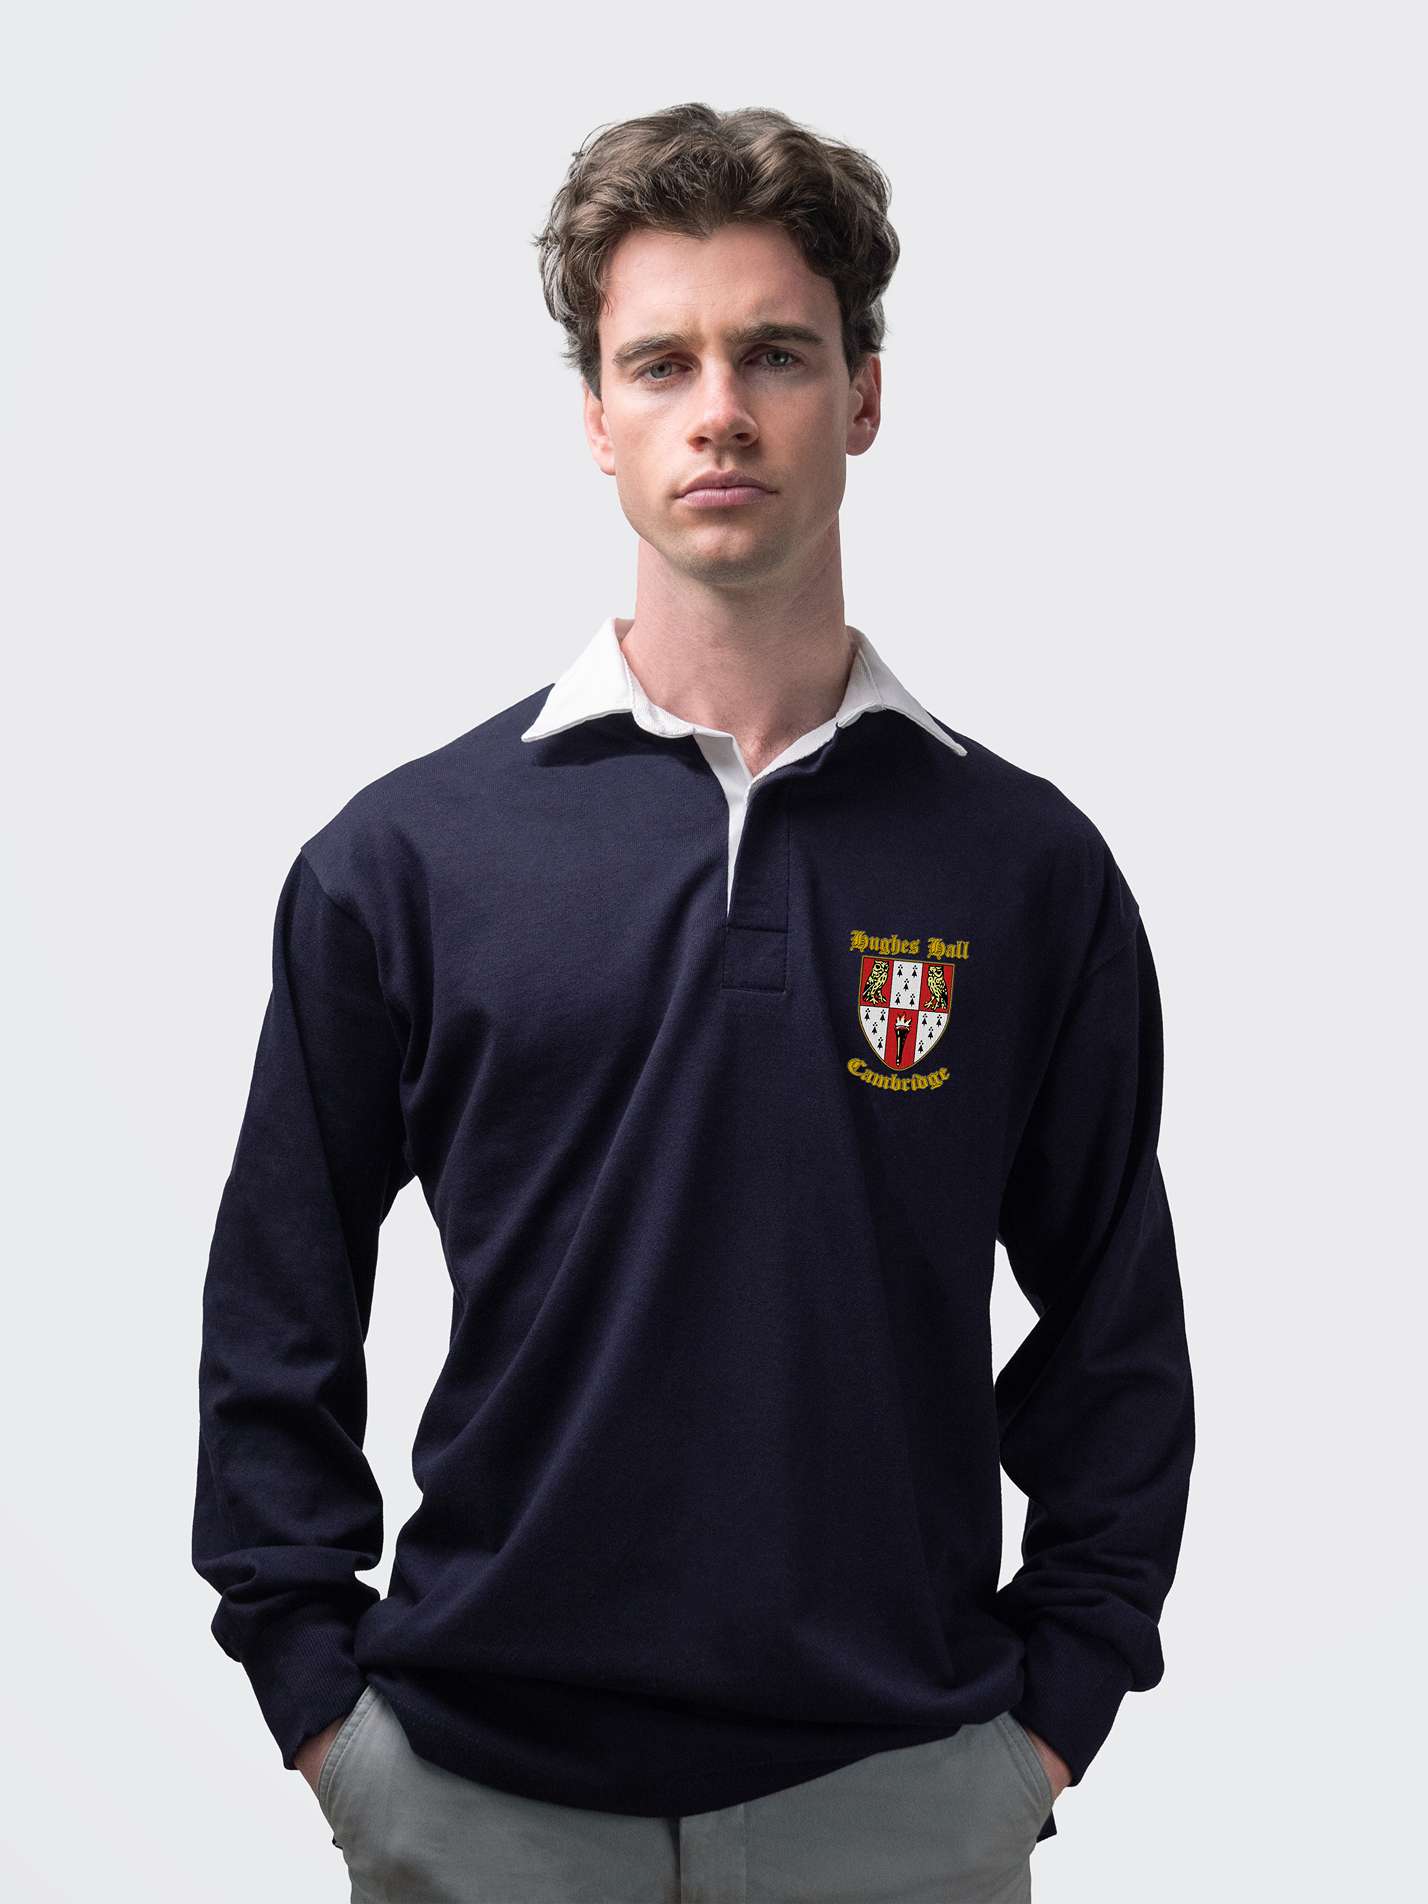 Hughes Hall student wearing an embroidered mens rugby shirt in navy